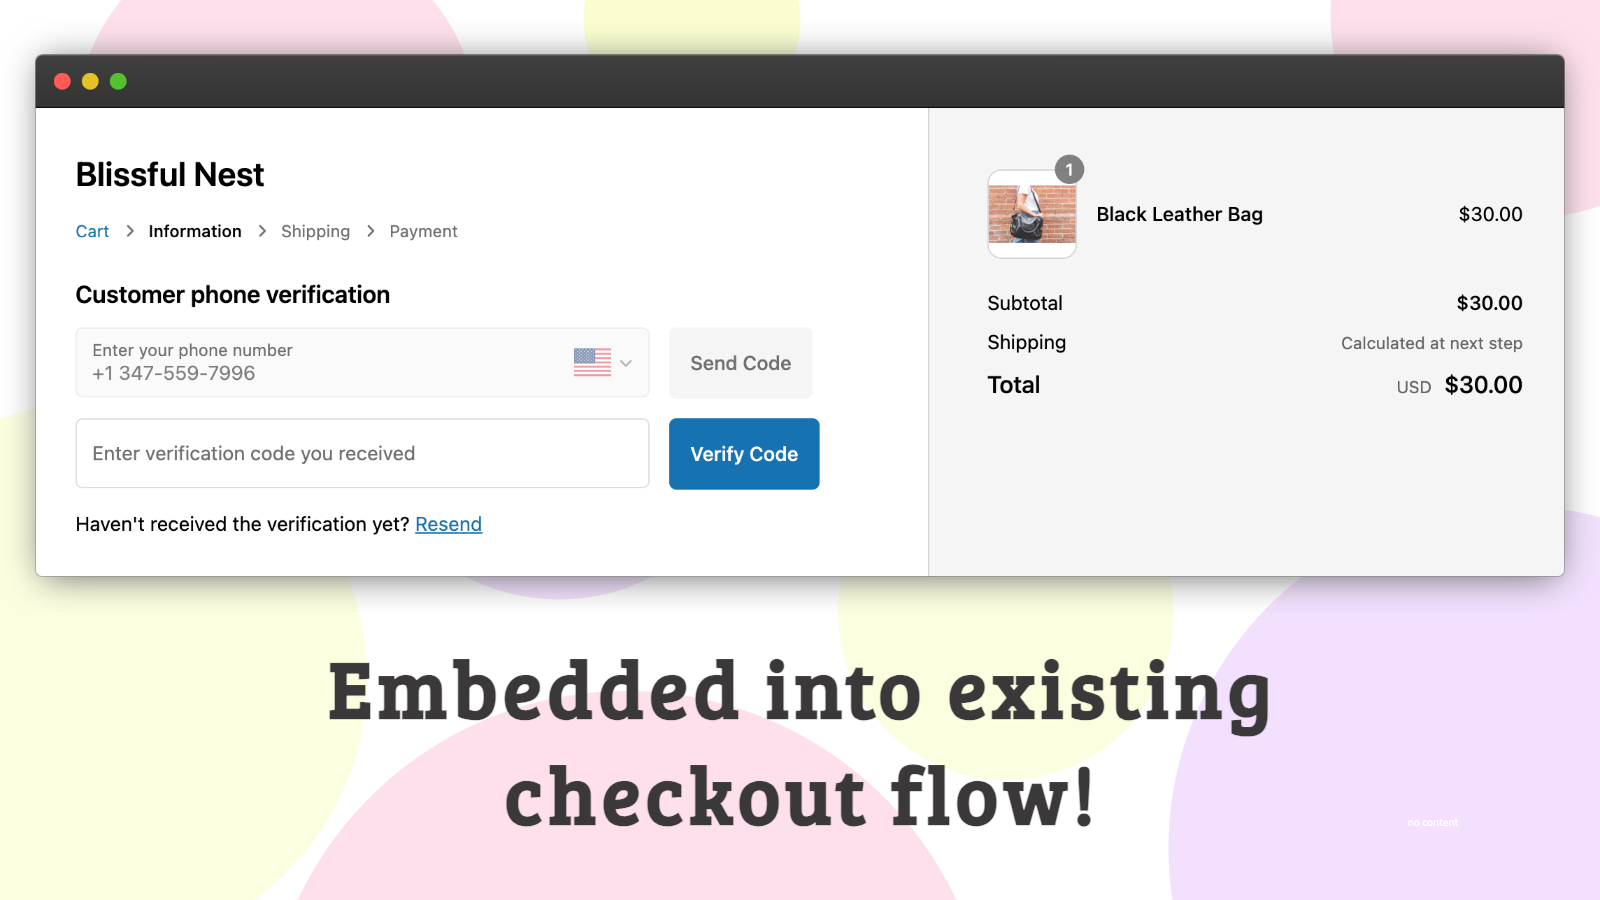 Embedded into existing checkout flow